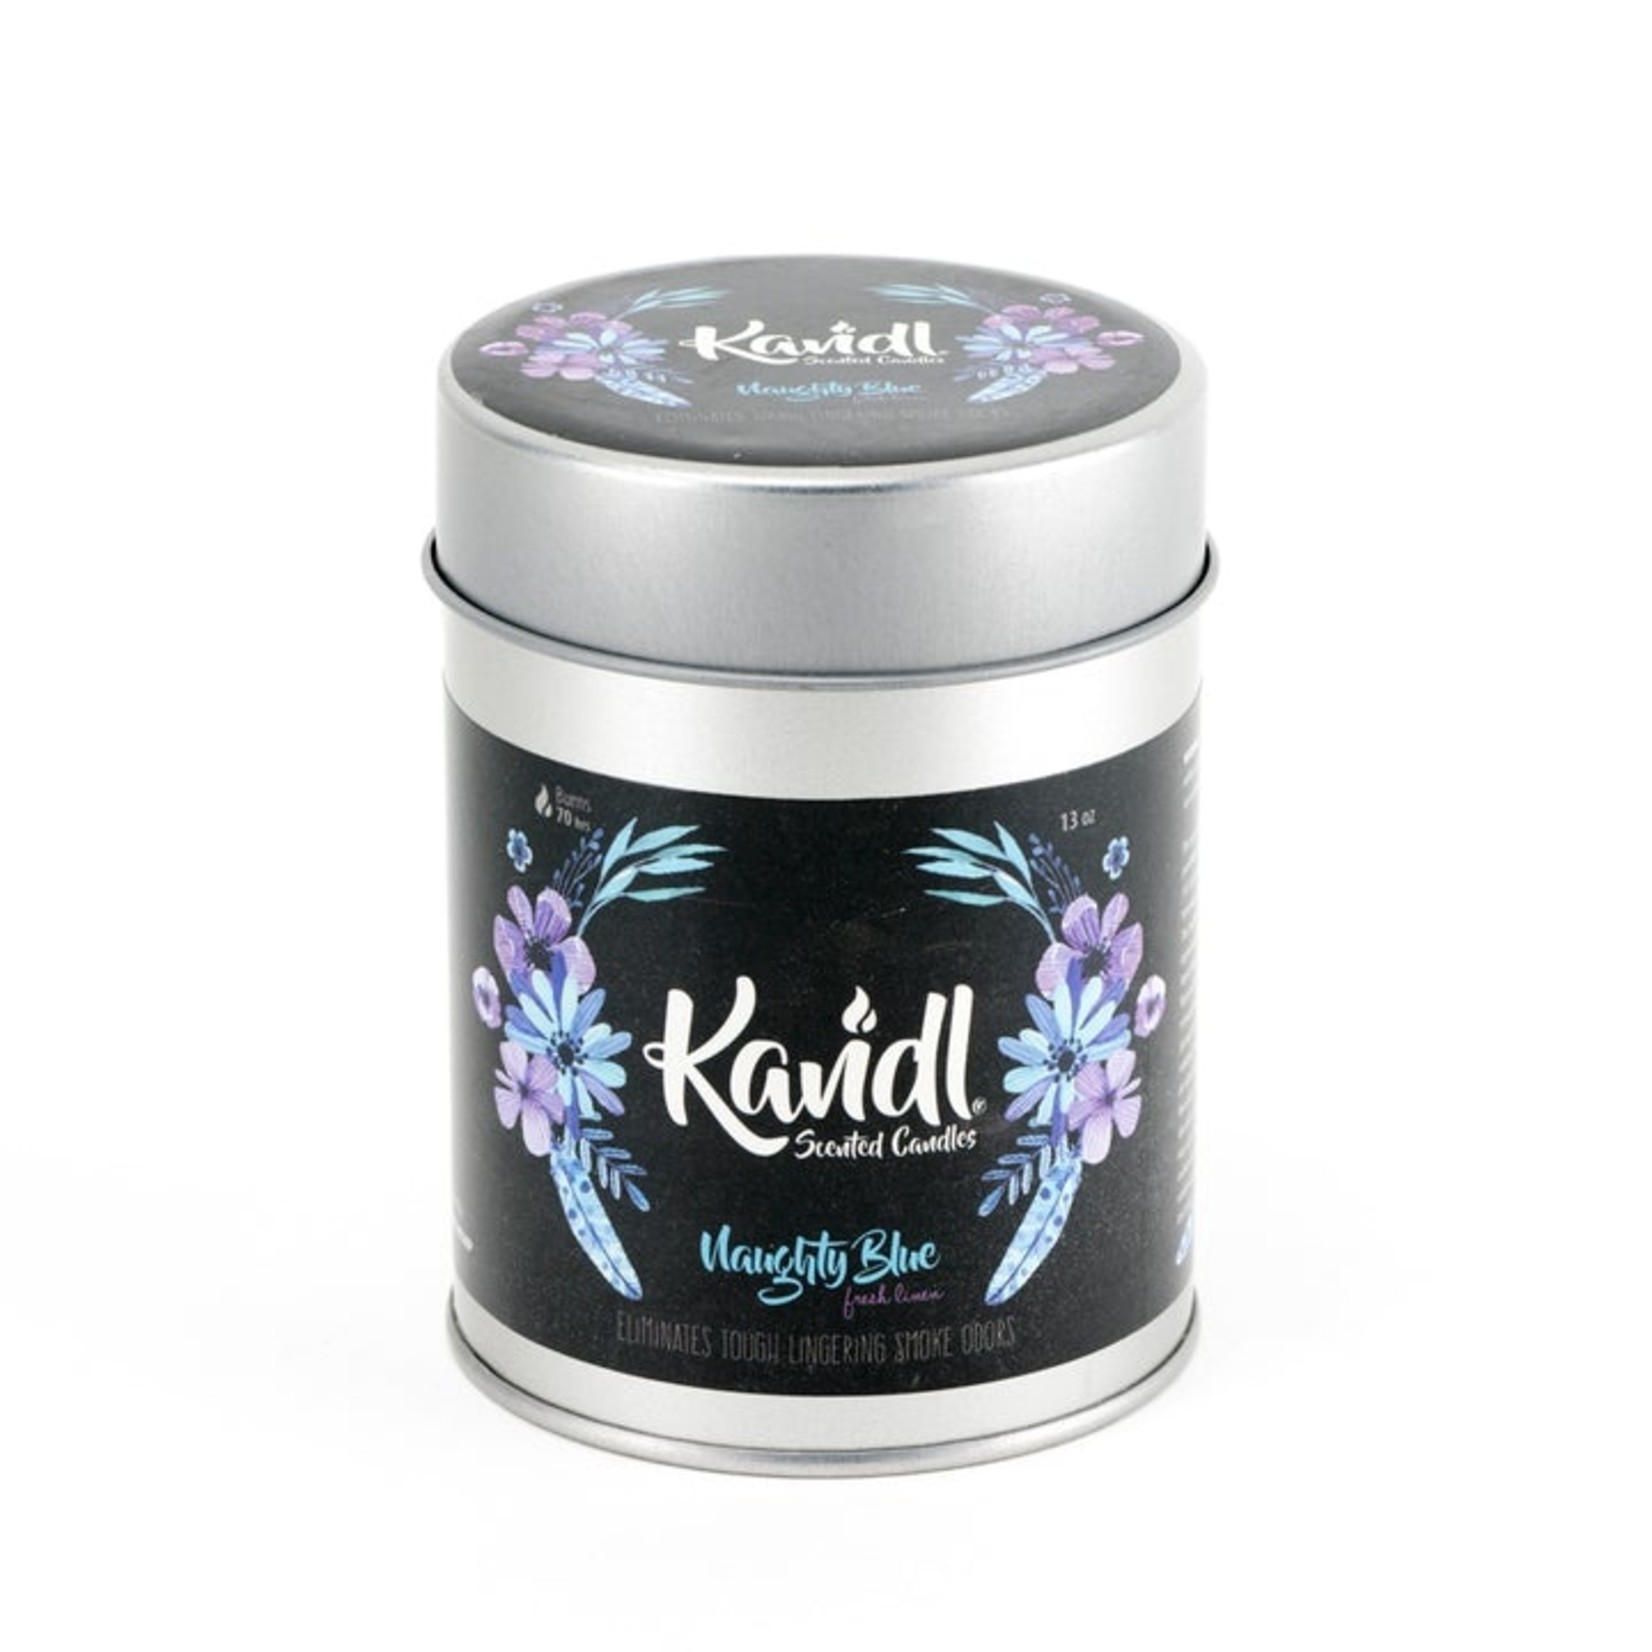 KANDL SCENTED CANDLES NAUGHTY BLUE FRESH LINEN